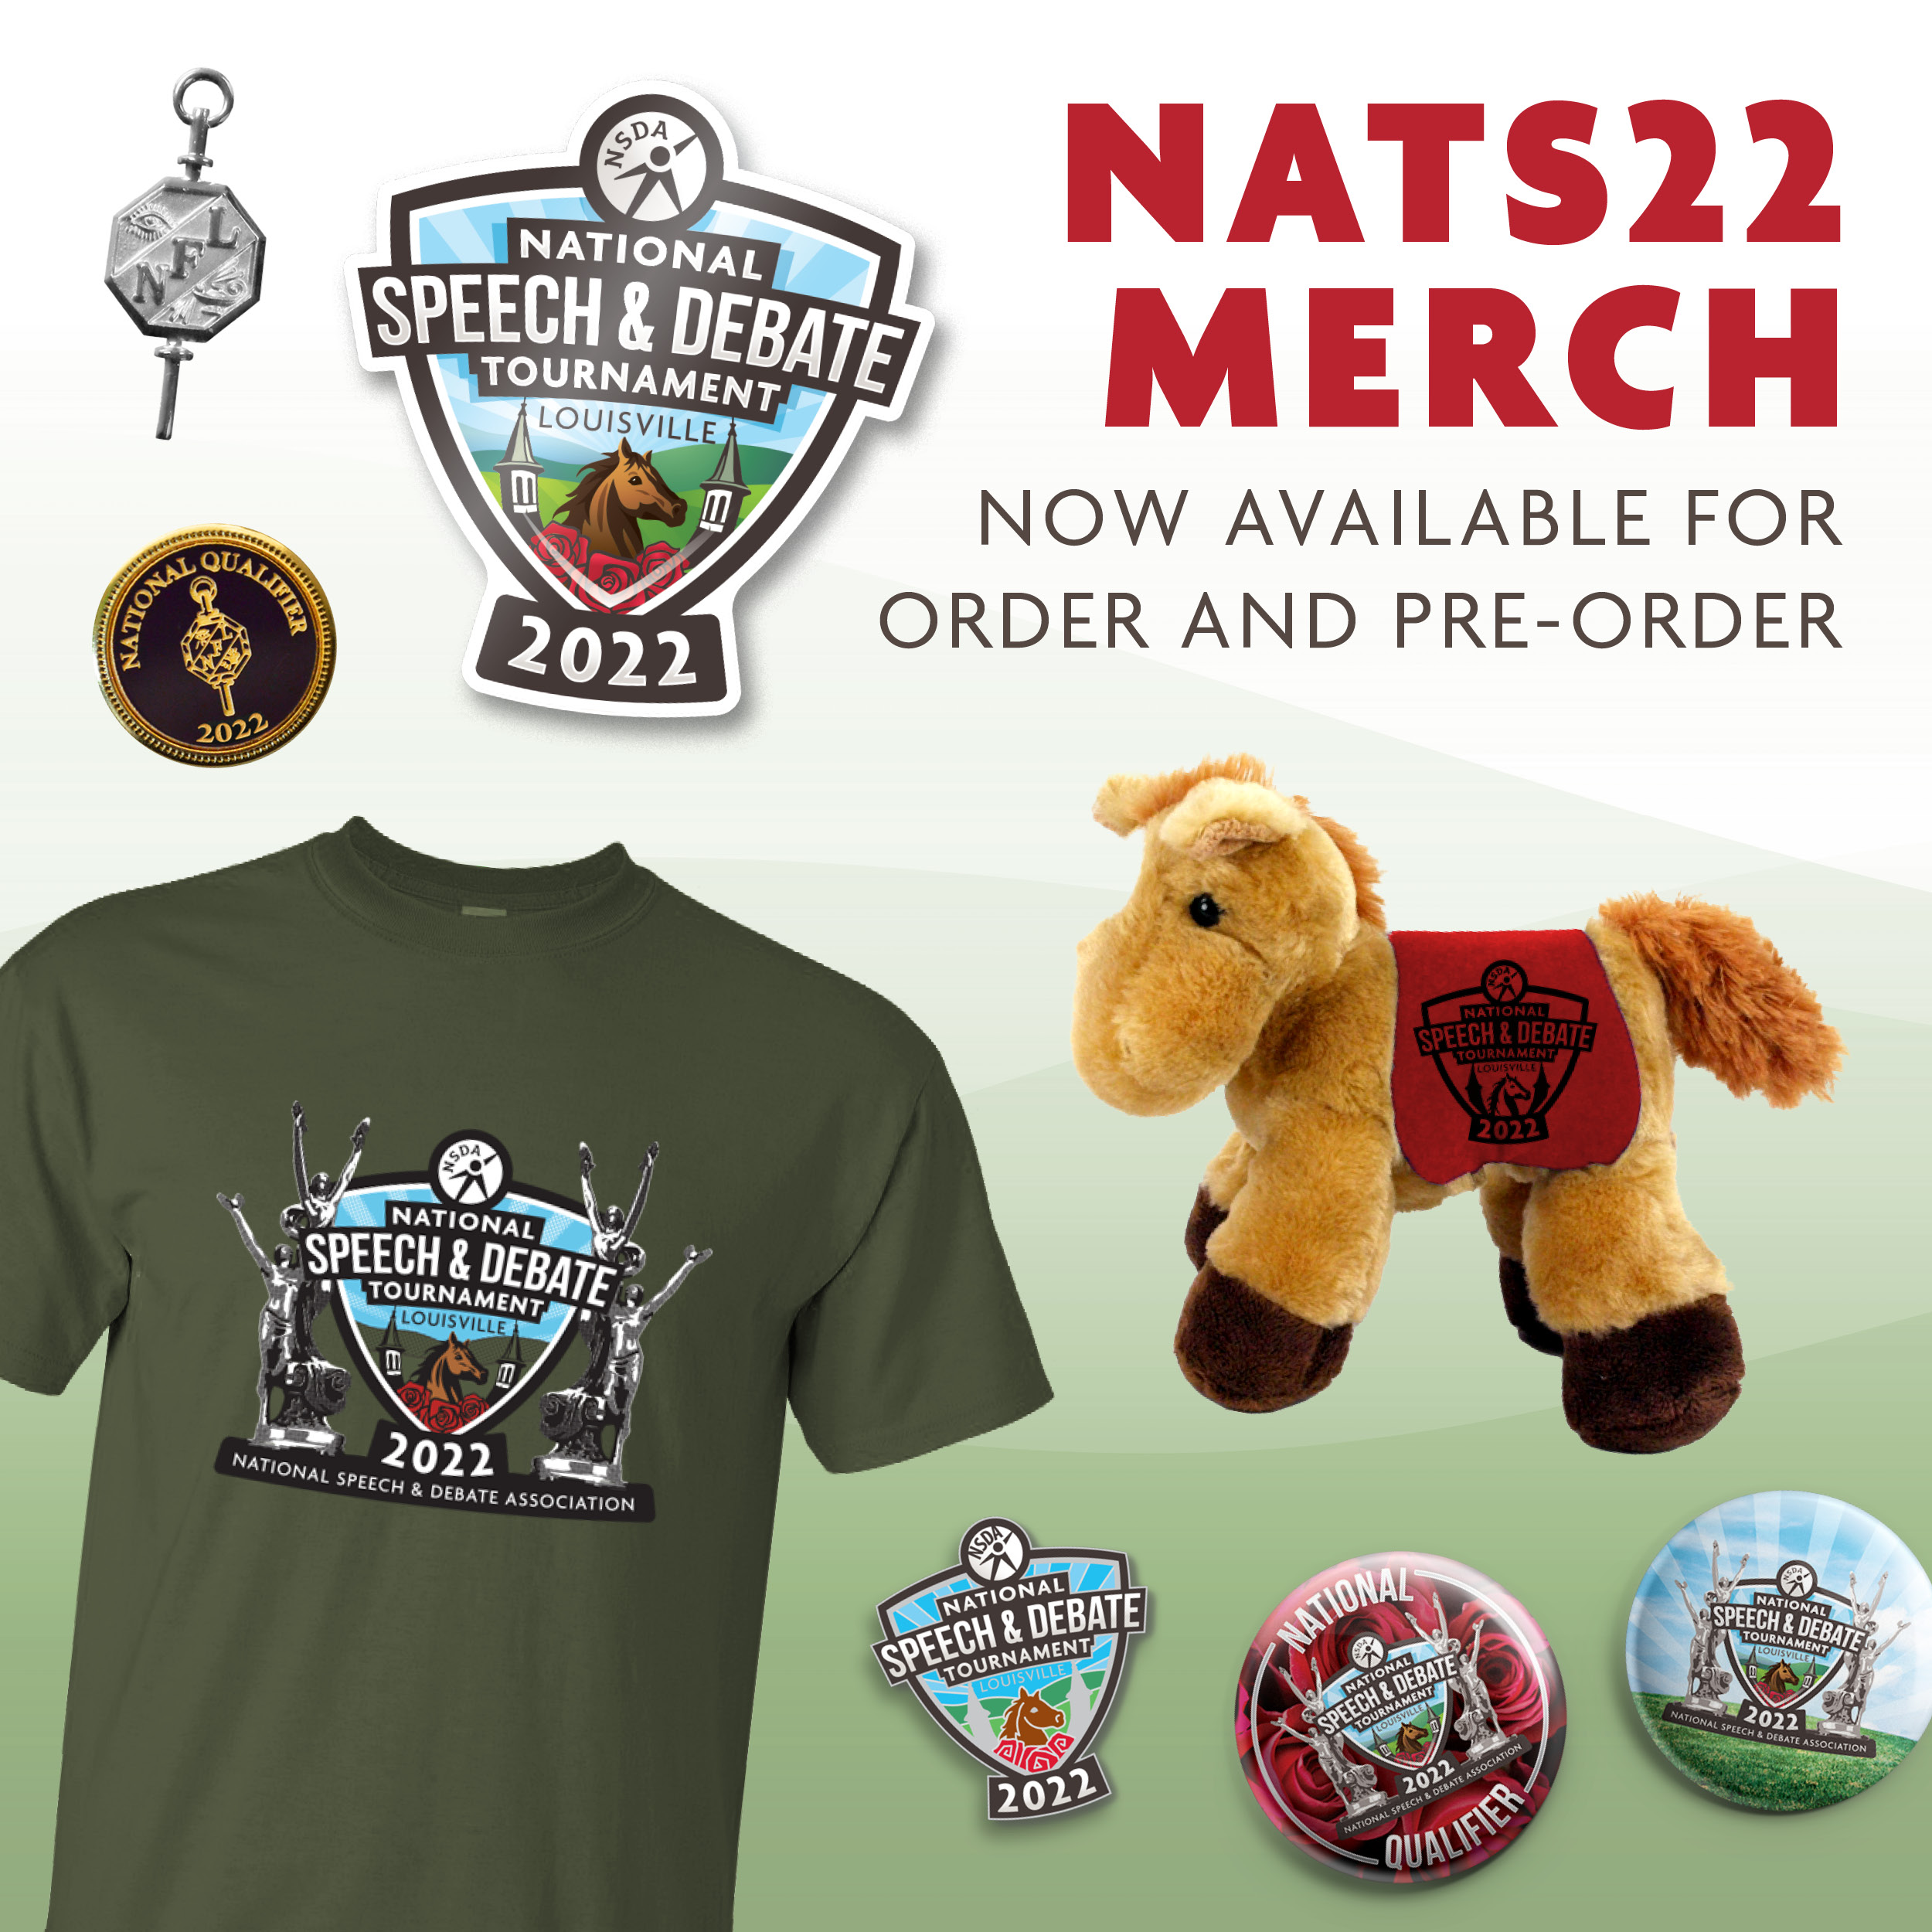 Nats 22 Merch Now Available For Order and Pre-Order